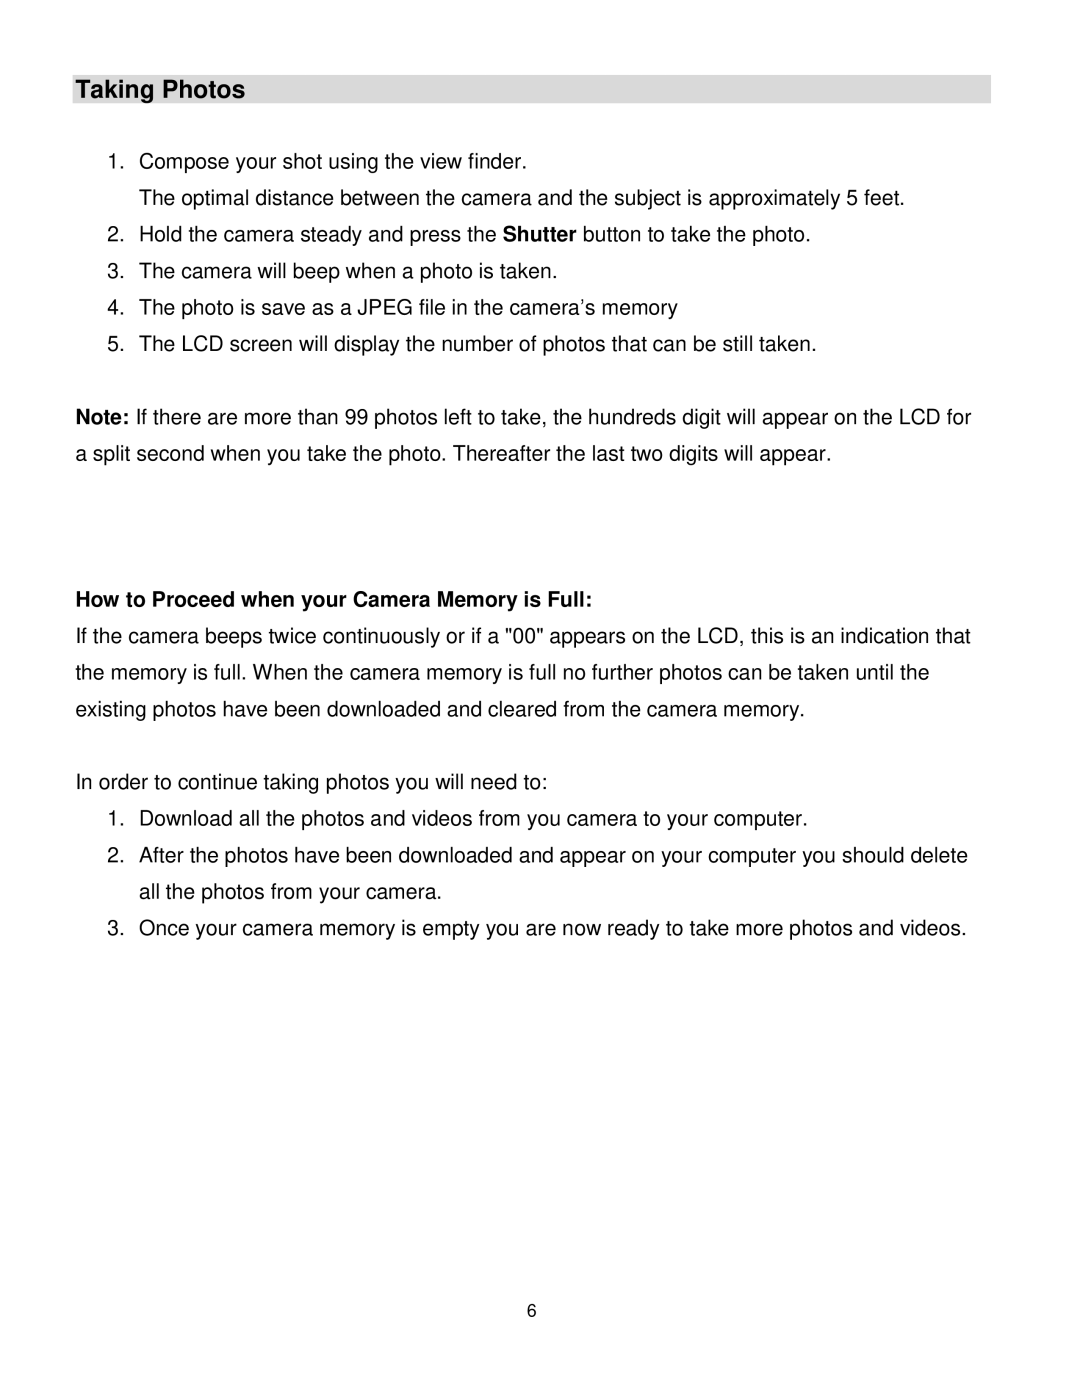 Vivitar V69379M user manual Taking Photos, How to Proceed when your Camera Memory is Full 